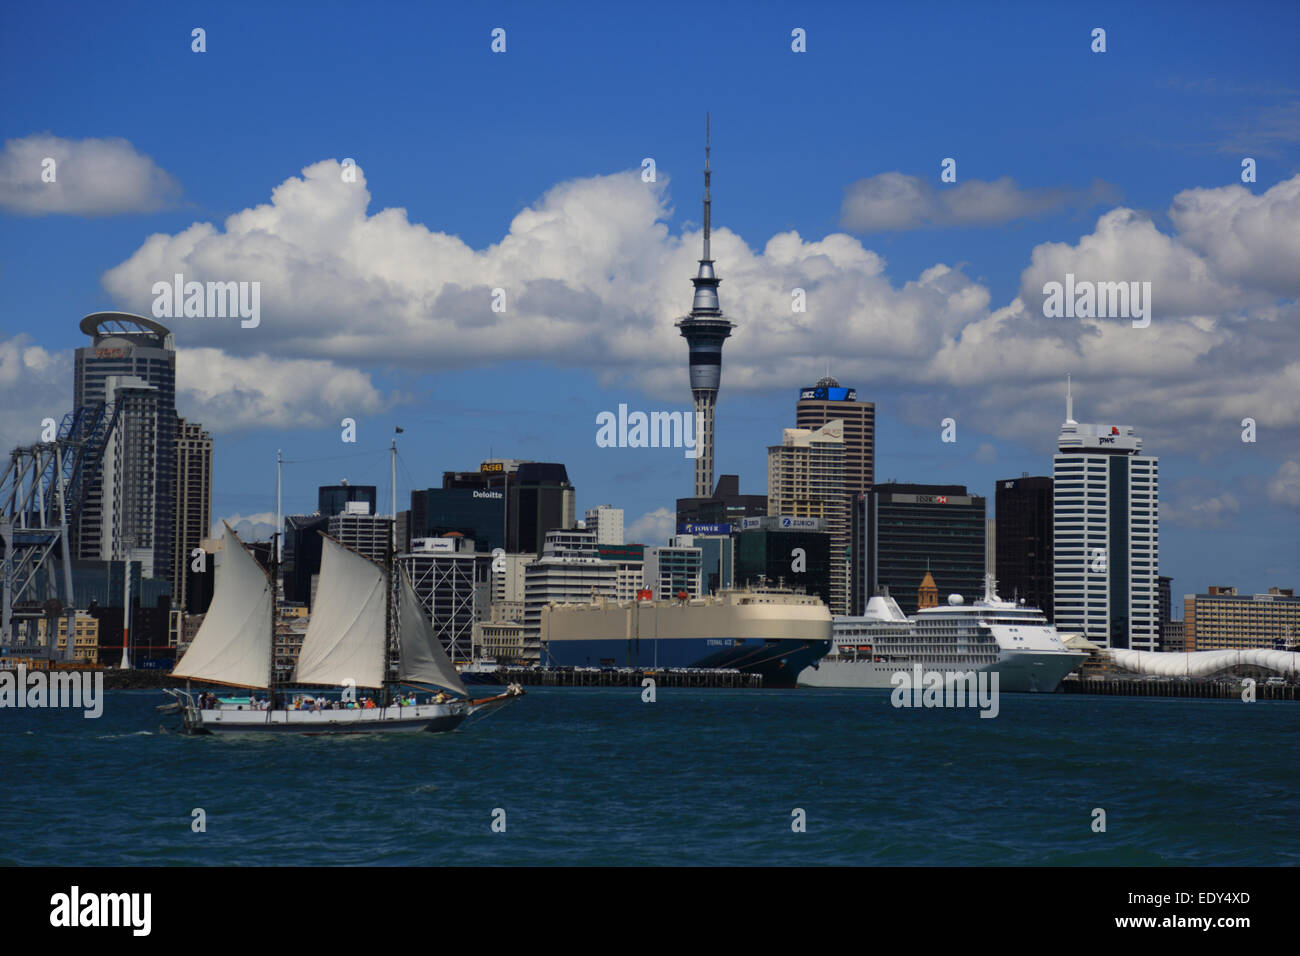 Auckland Port and skyline with sail boat, Diamond Princess cruise ship and other shipping from Devenport Ferry, New Zealand Stock Photo